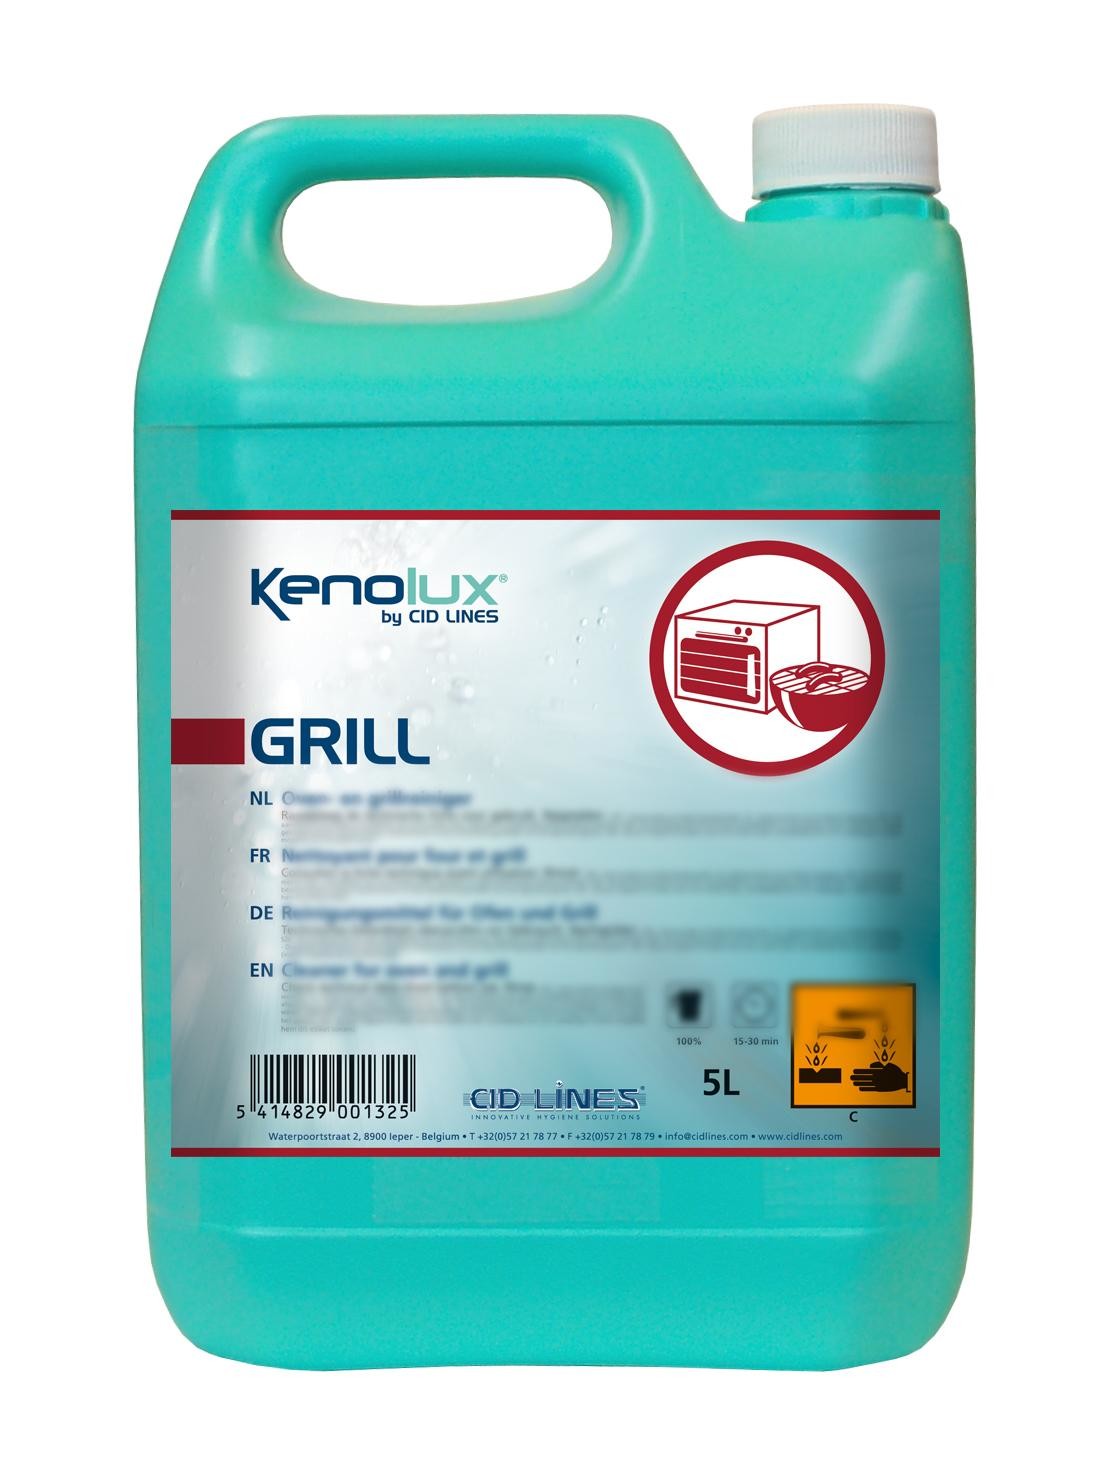 Kenolux Grill 5L CID Lines nettoyant four & grill 